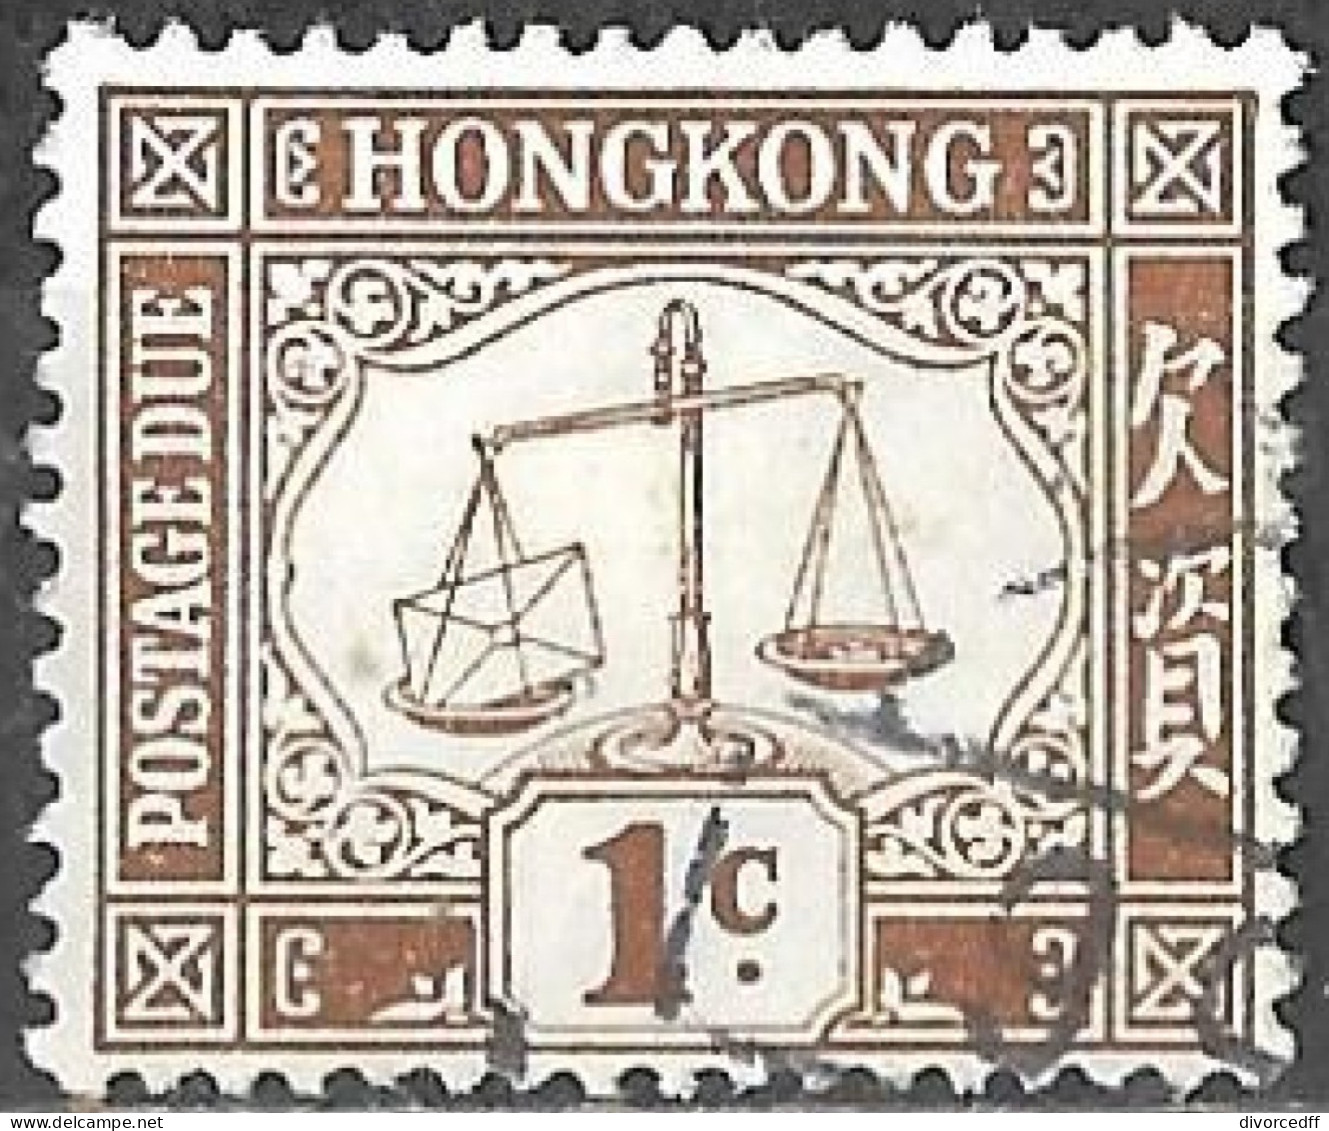 Hong Kong Used Postage Due Stamp Scales Showing Letter Overweight 1 Cent [WLT283] - Portomarken